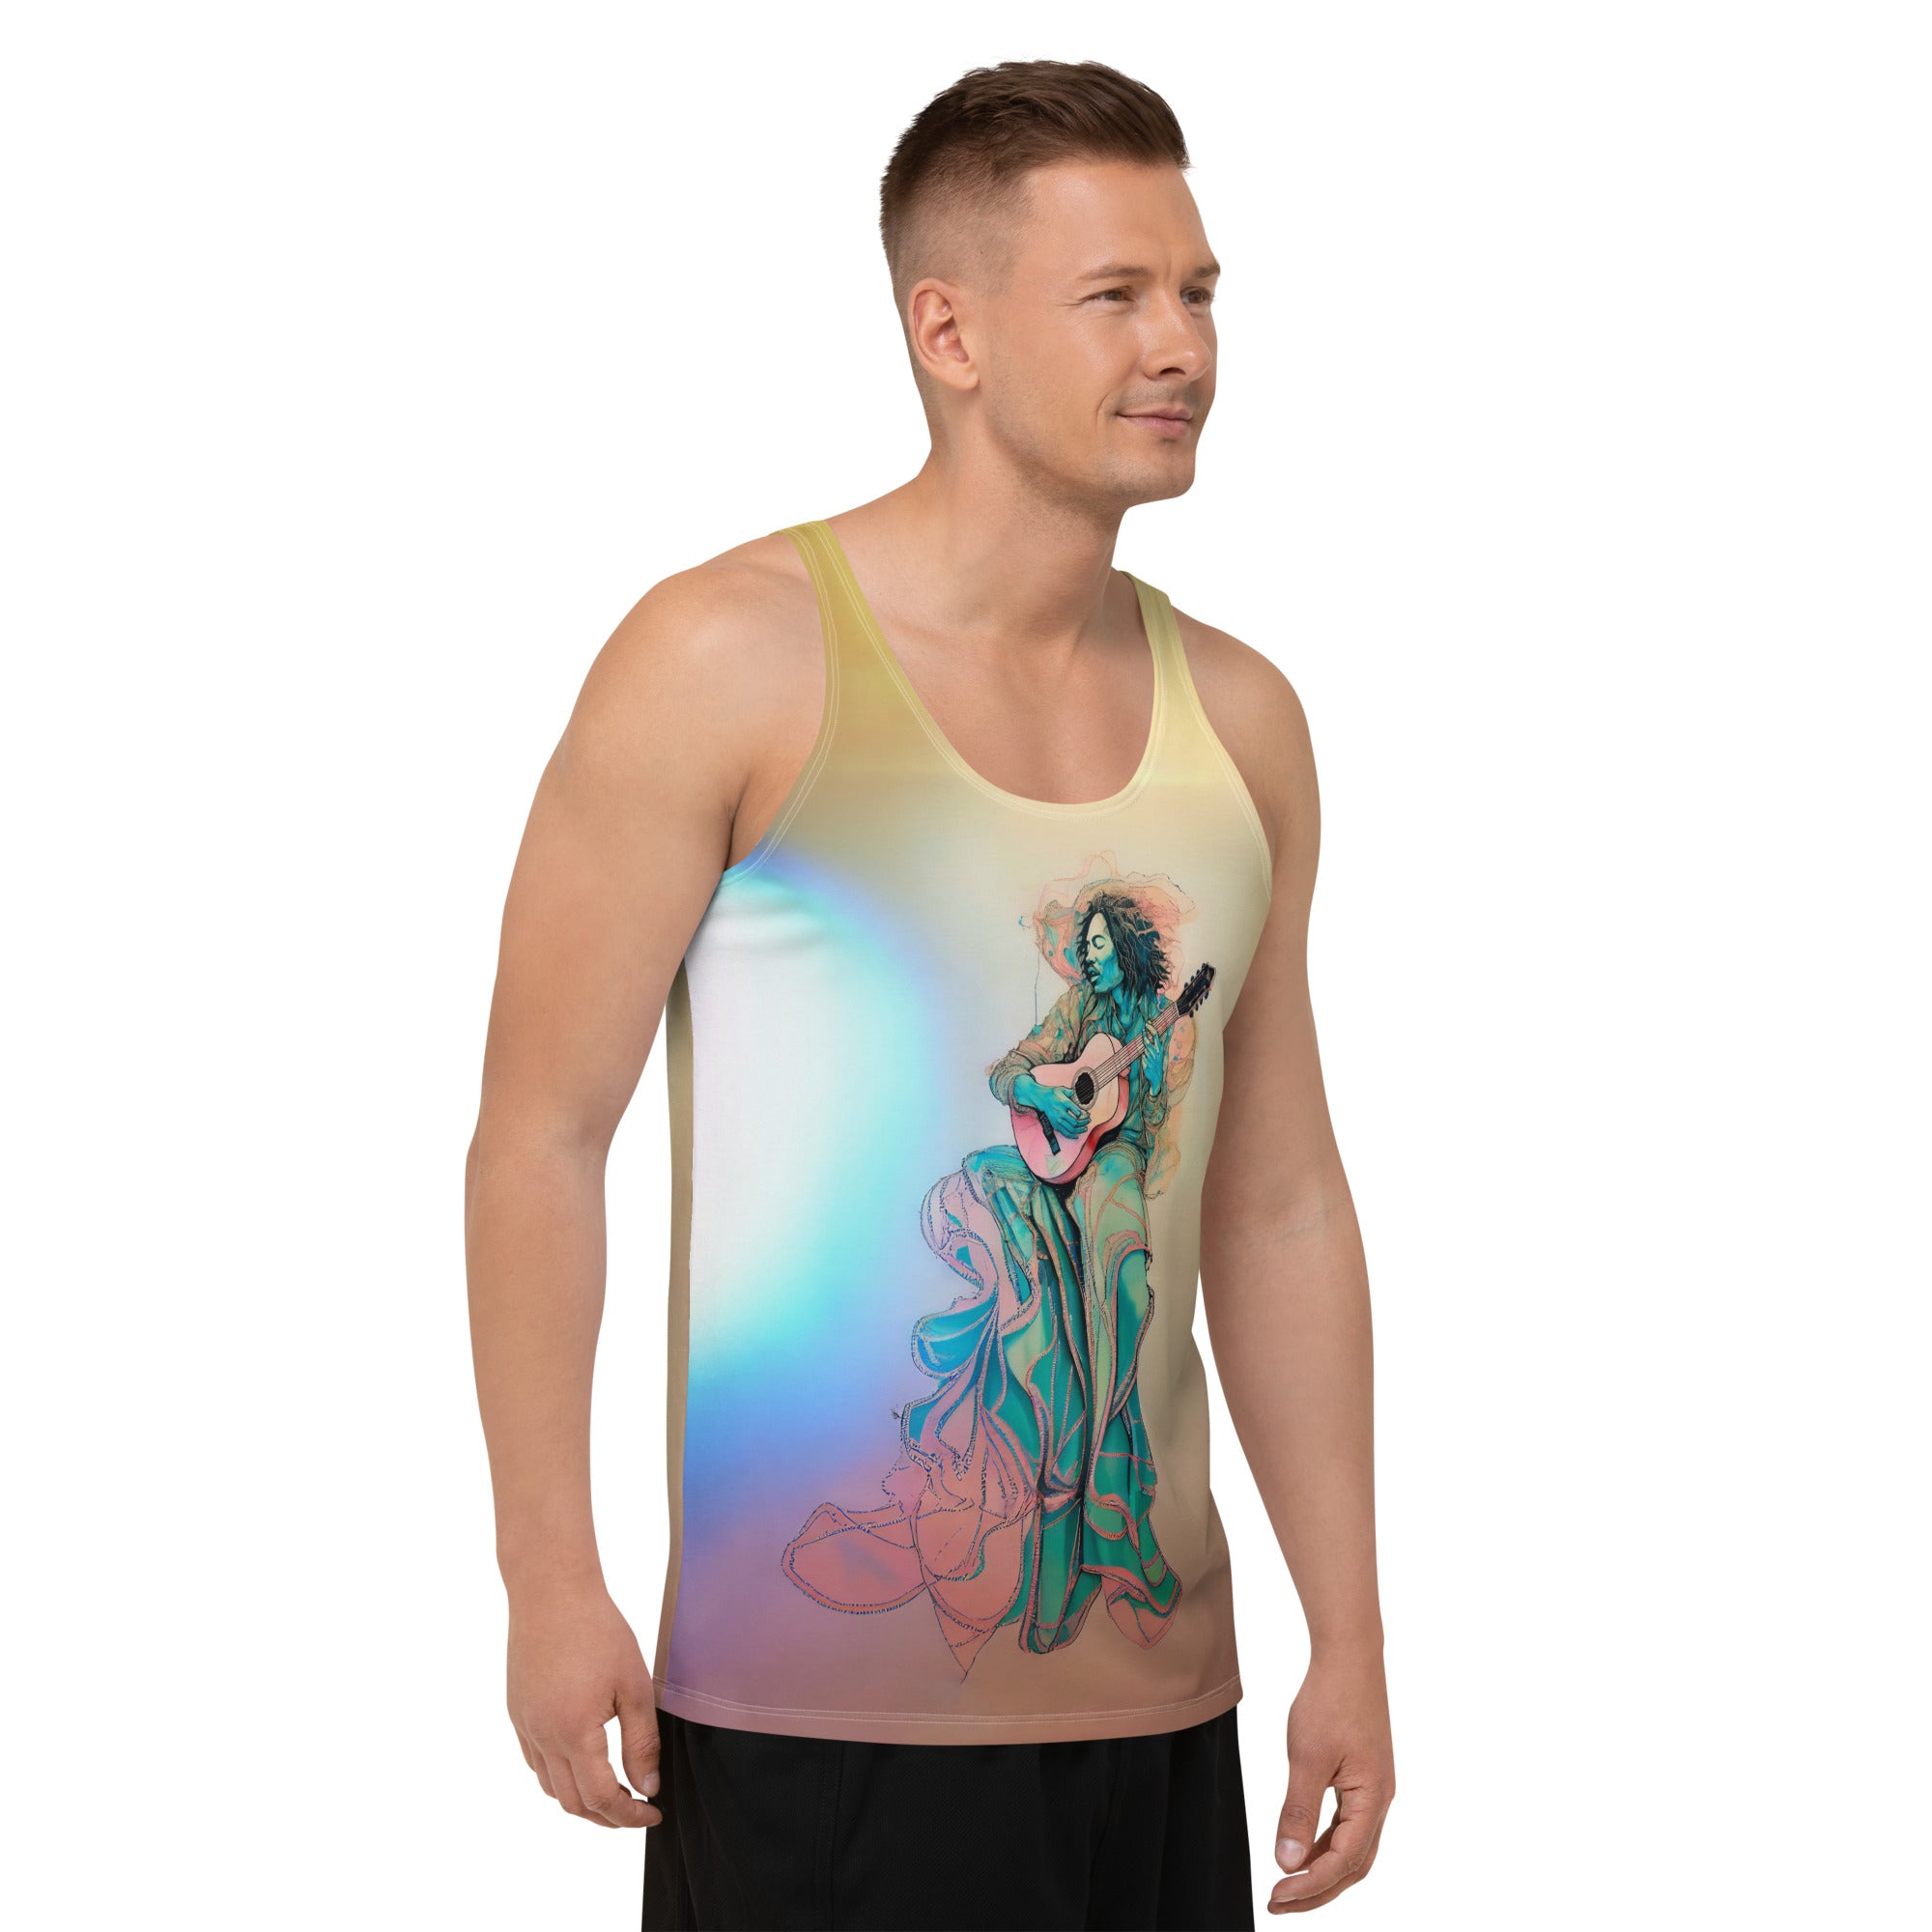 Whimsical Wildflowers Men's Tank Top displayed on a clothing rack.